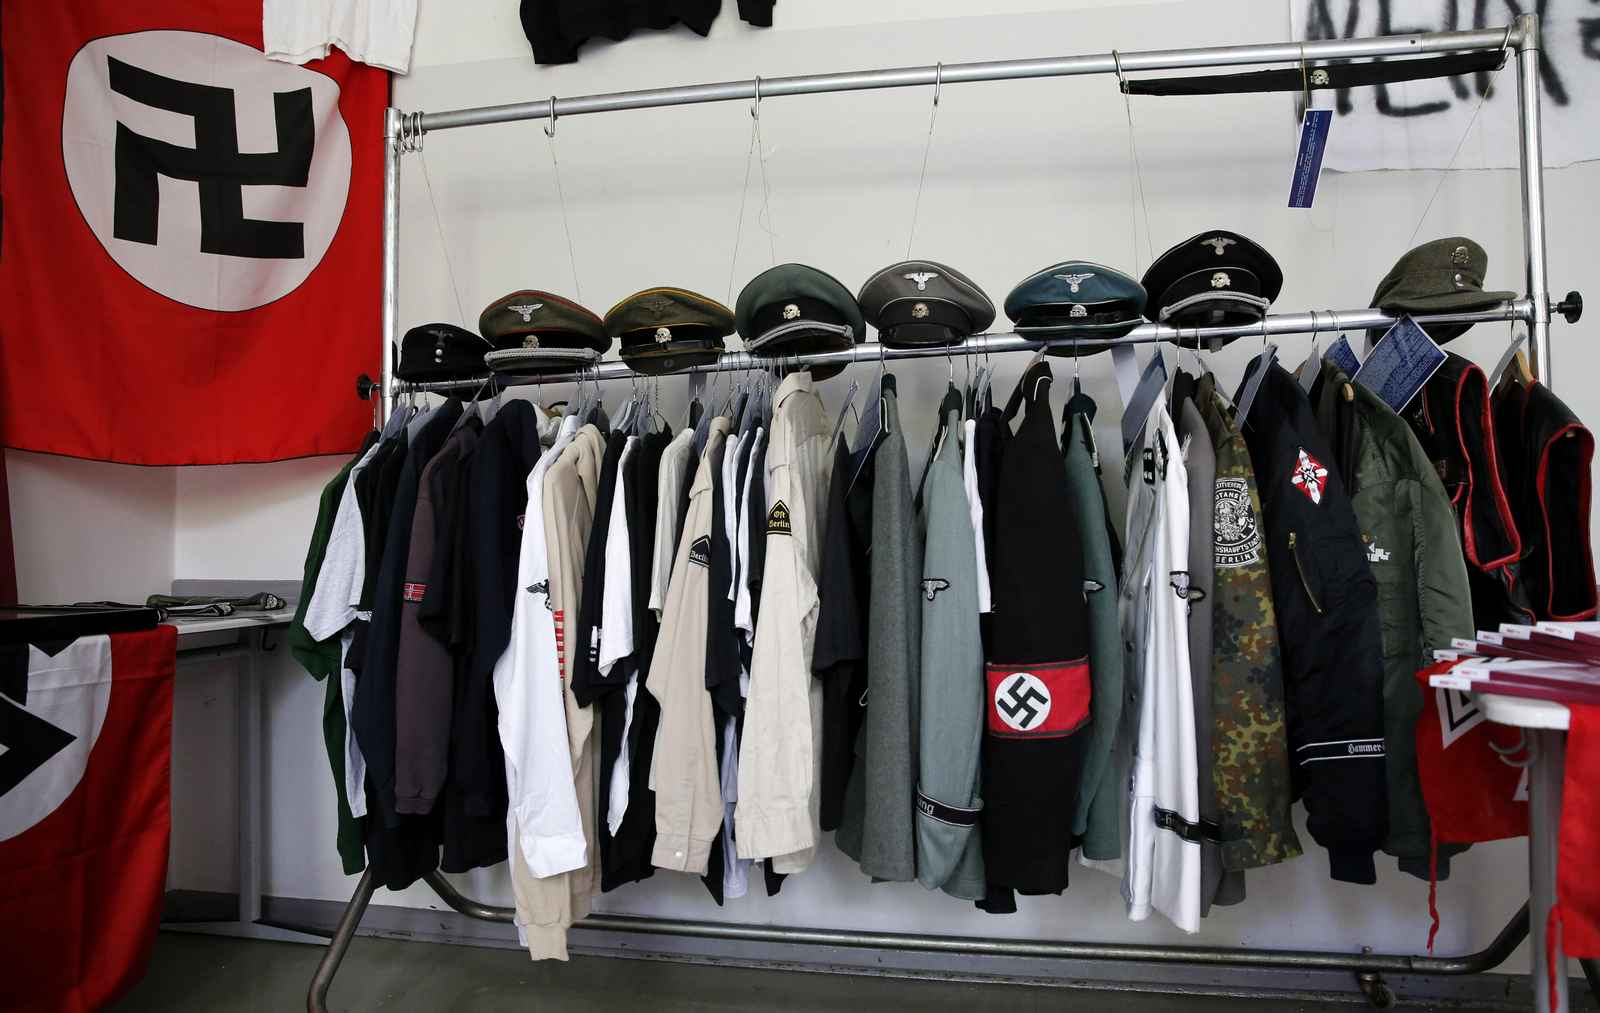 Nazi uniforms and a Swastika flag that were confiscated by the Berlin police during raids against German neo-Nazis are presented to the public during an open day at a police barracks in Berlin, September 7, 2014.  REUTERS/Fabrizio Bensch (GERMANY - Tags: SOCIETY) - RTR459L6